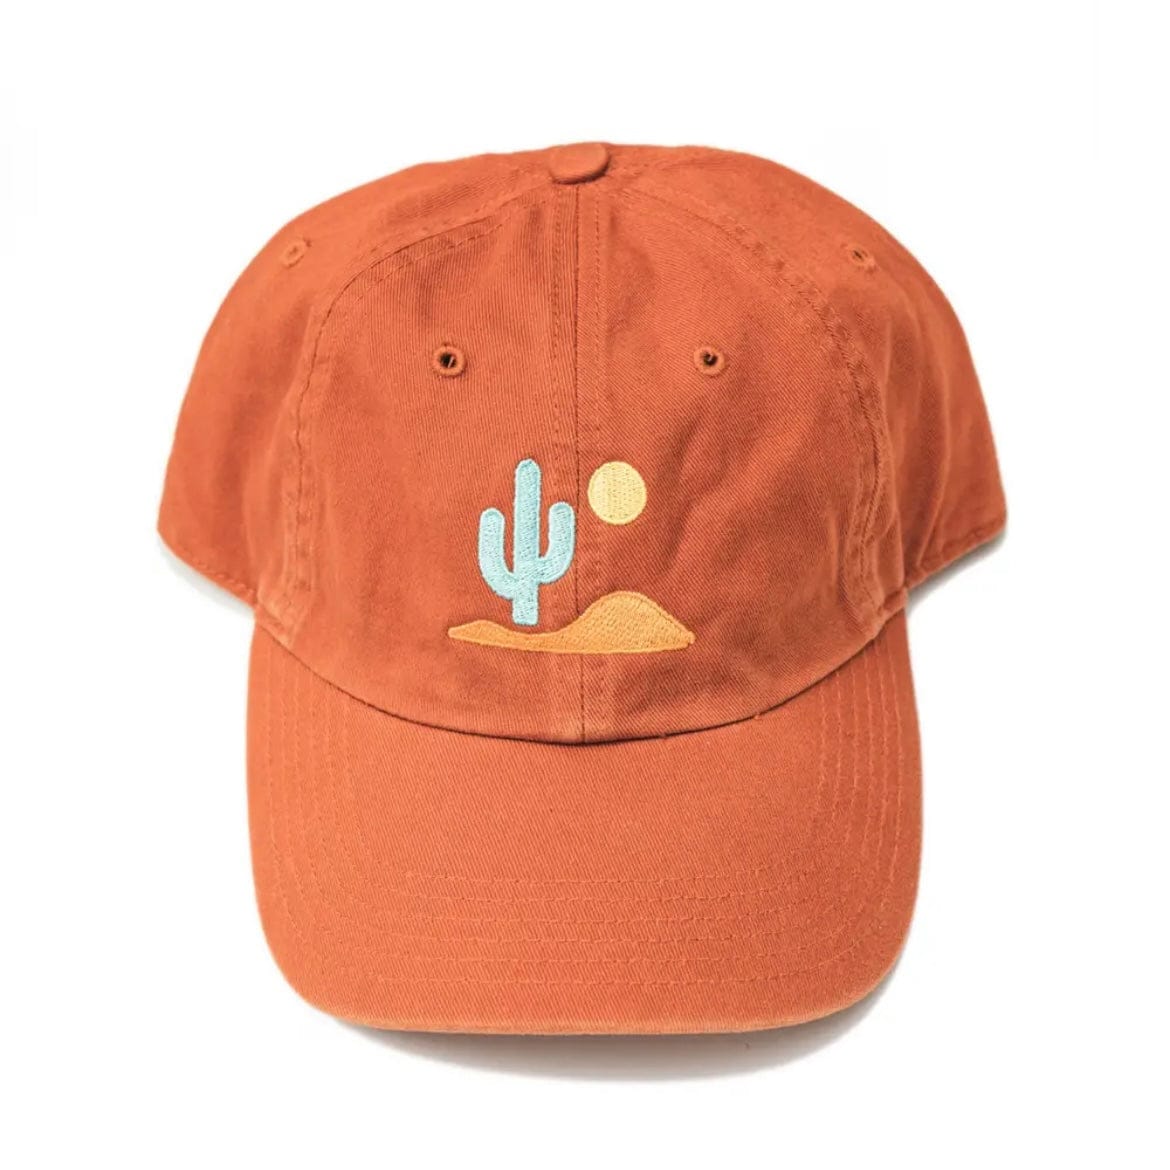 Rust-colored cactus hat with desert embroidery on 100% cotton twill